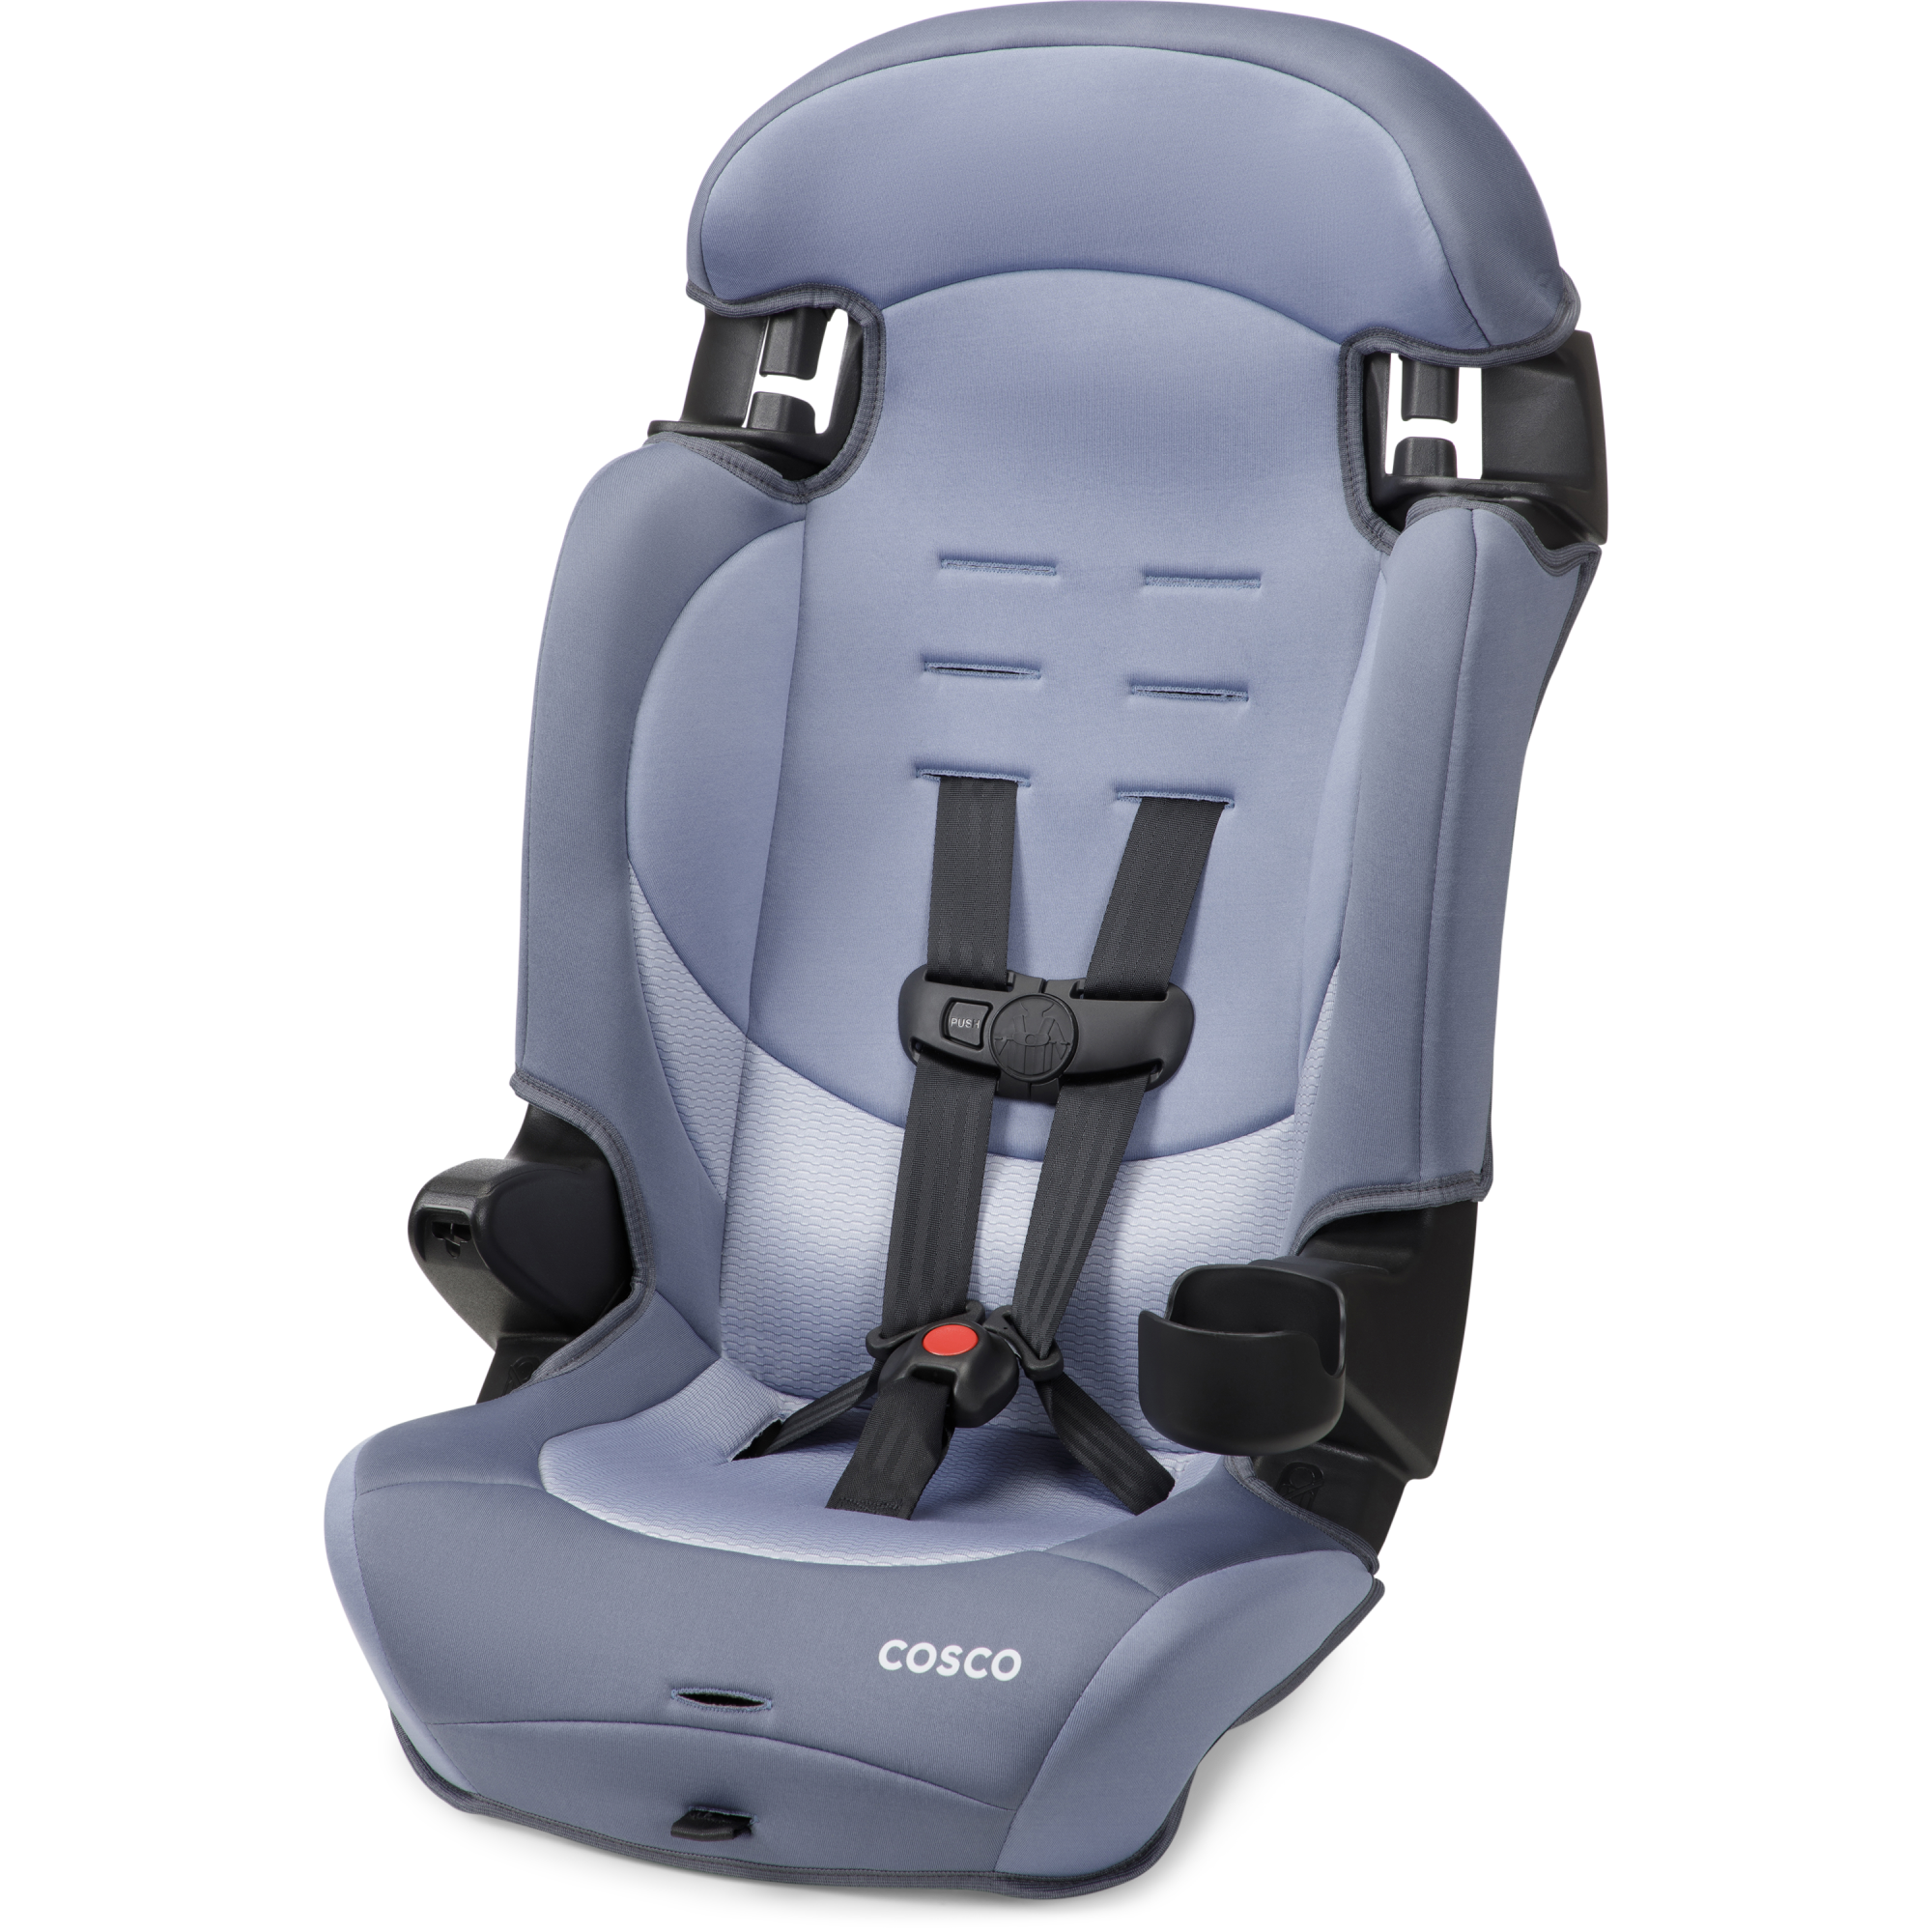 Finale DX 2-in-1 Booster Car Seat - Organic Waves